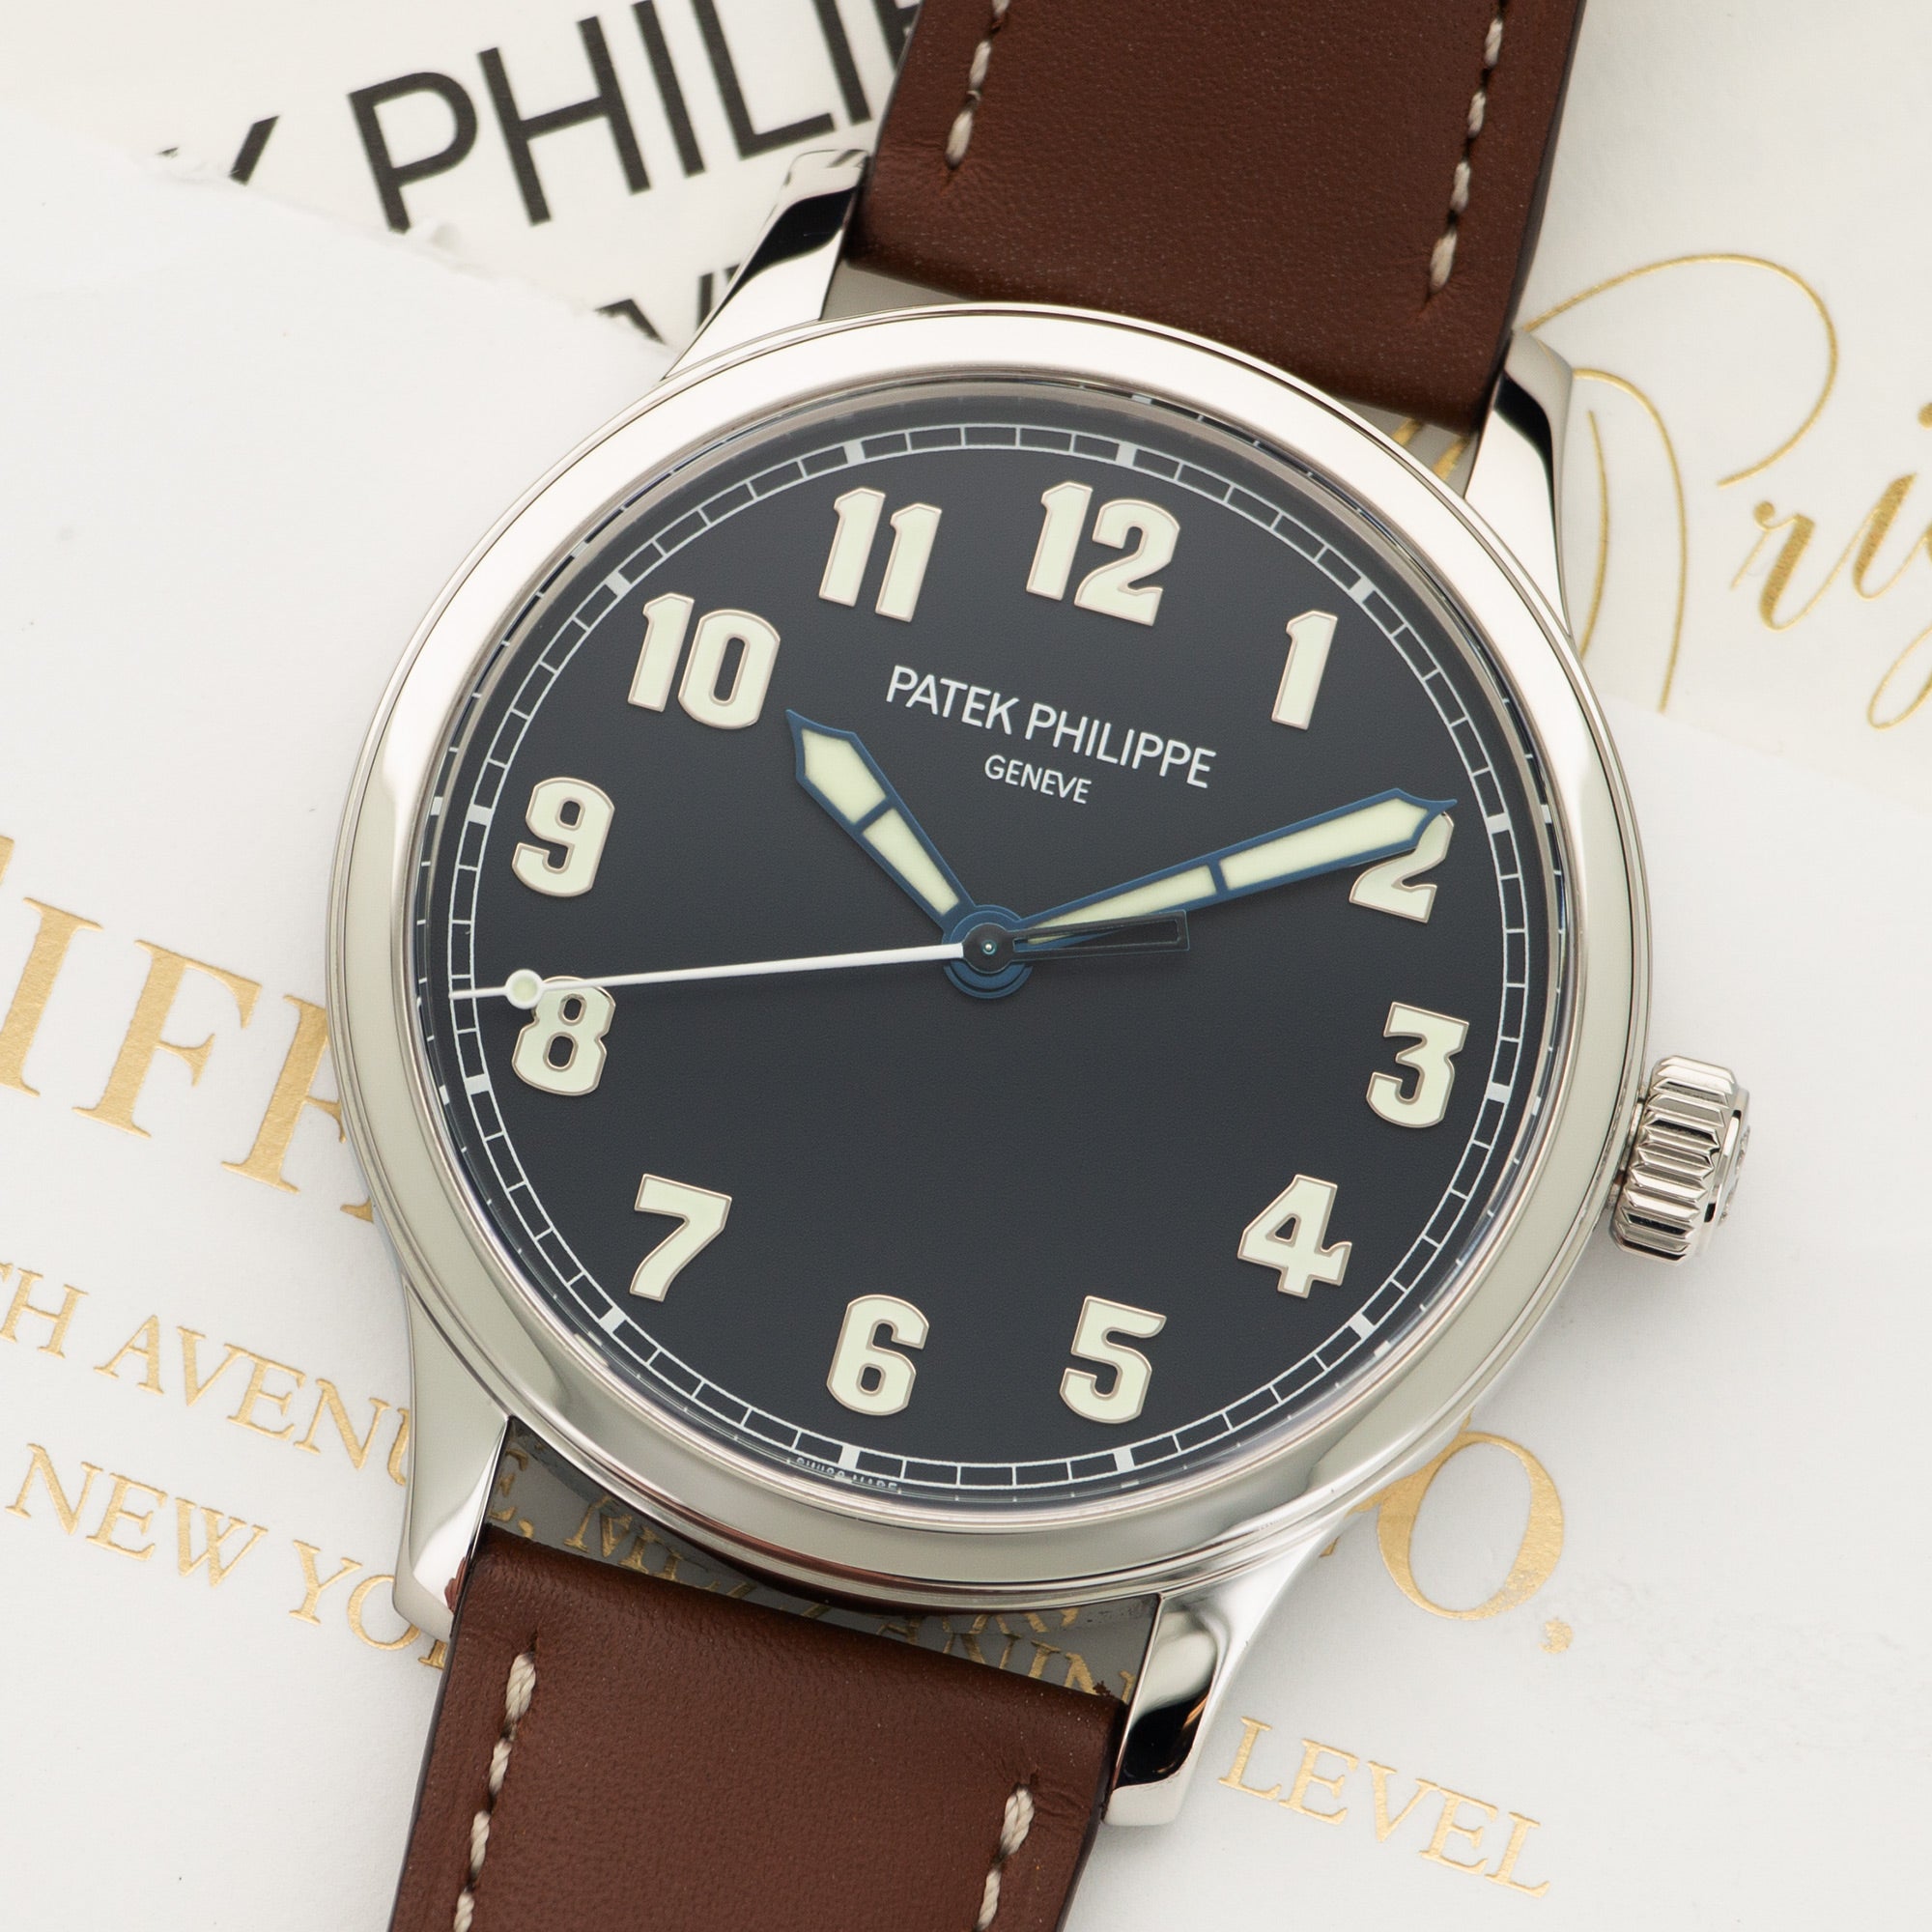 Patek Philippe - Patek Philippe Stainless Steel Pilot Watch Ref. 5522 Retailed by Tiffany &amp; Co. - The Keystone Watches